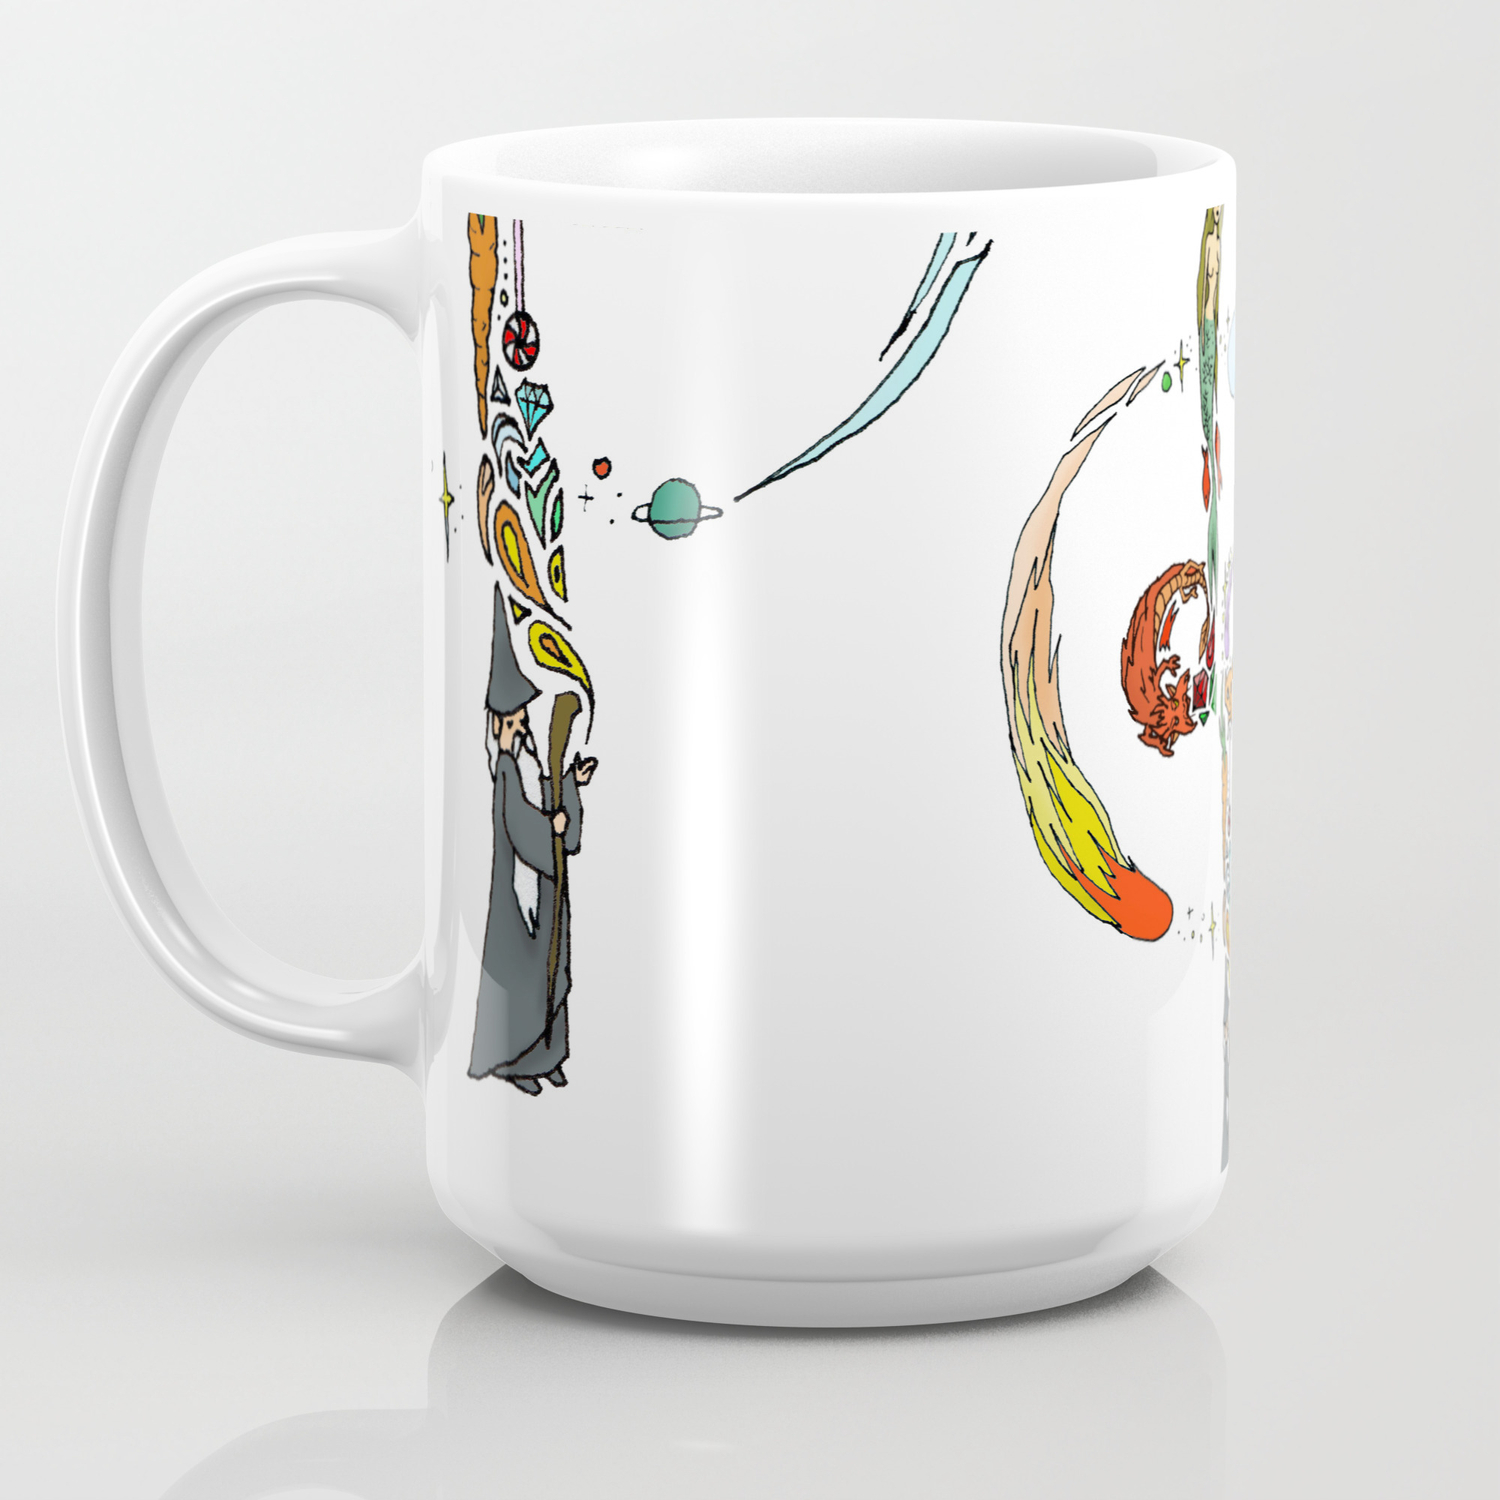 Details about   Teespring Amber It's A Thing Mug Ceramic 